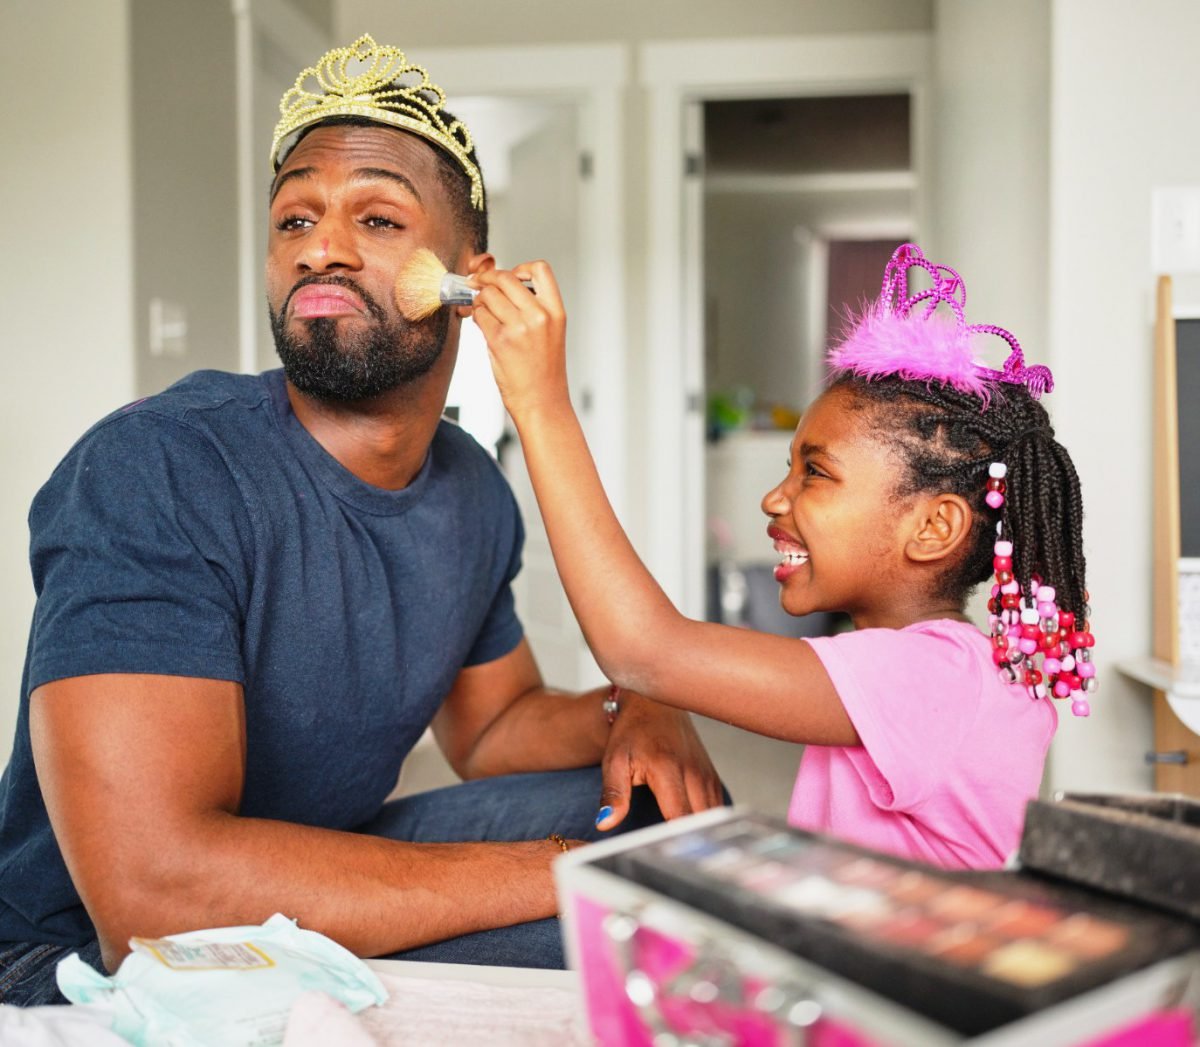 Check Out These Touching Photos of Fathers With Their Children